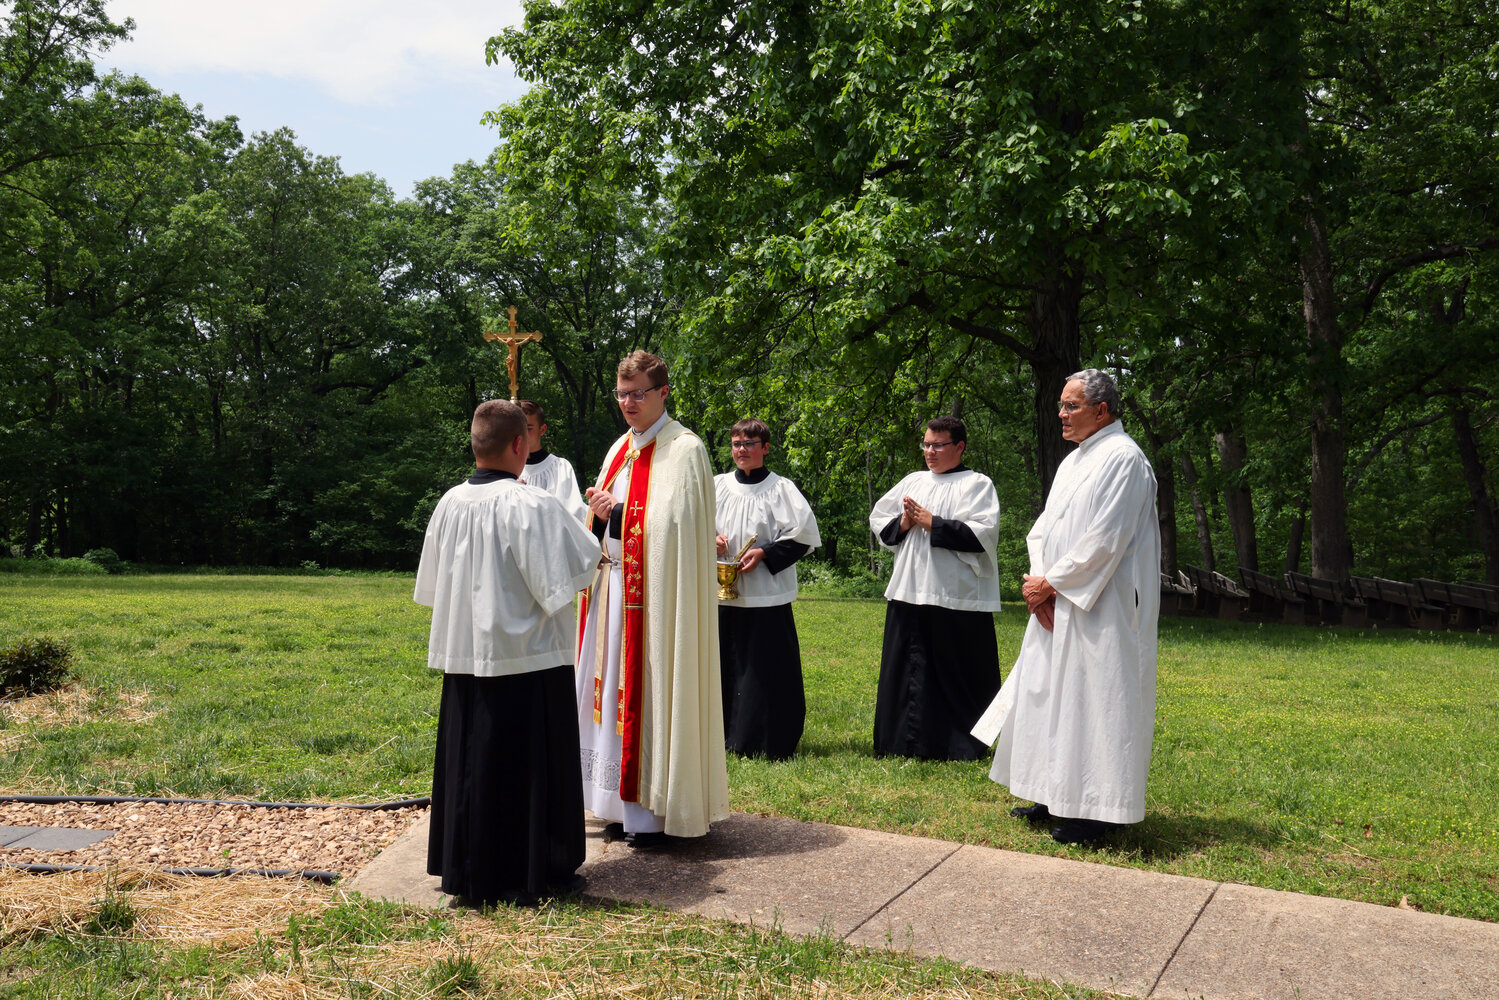 Father Tony Ritter of the St. Louis archdiocese, Sam Cramer’s Eagle Scout mentor, blesses and dedicates the Rosary Walk Sam built for an Eagle Scout project outside the chapel of the Shrine of Our Lady of Sorrows in Starkenburg, on May 13, the Feast of Our Lady of Fatima.